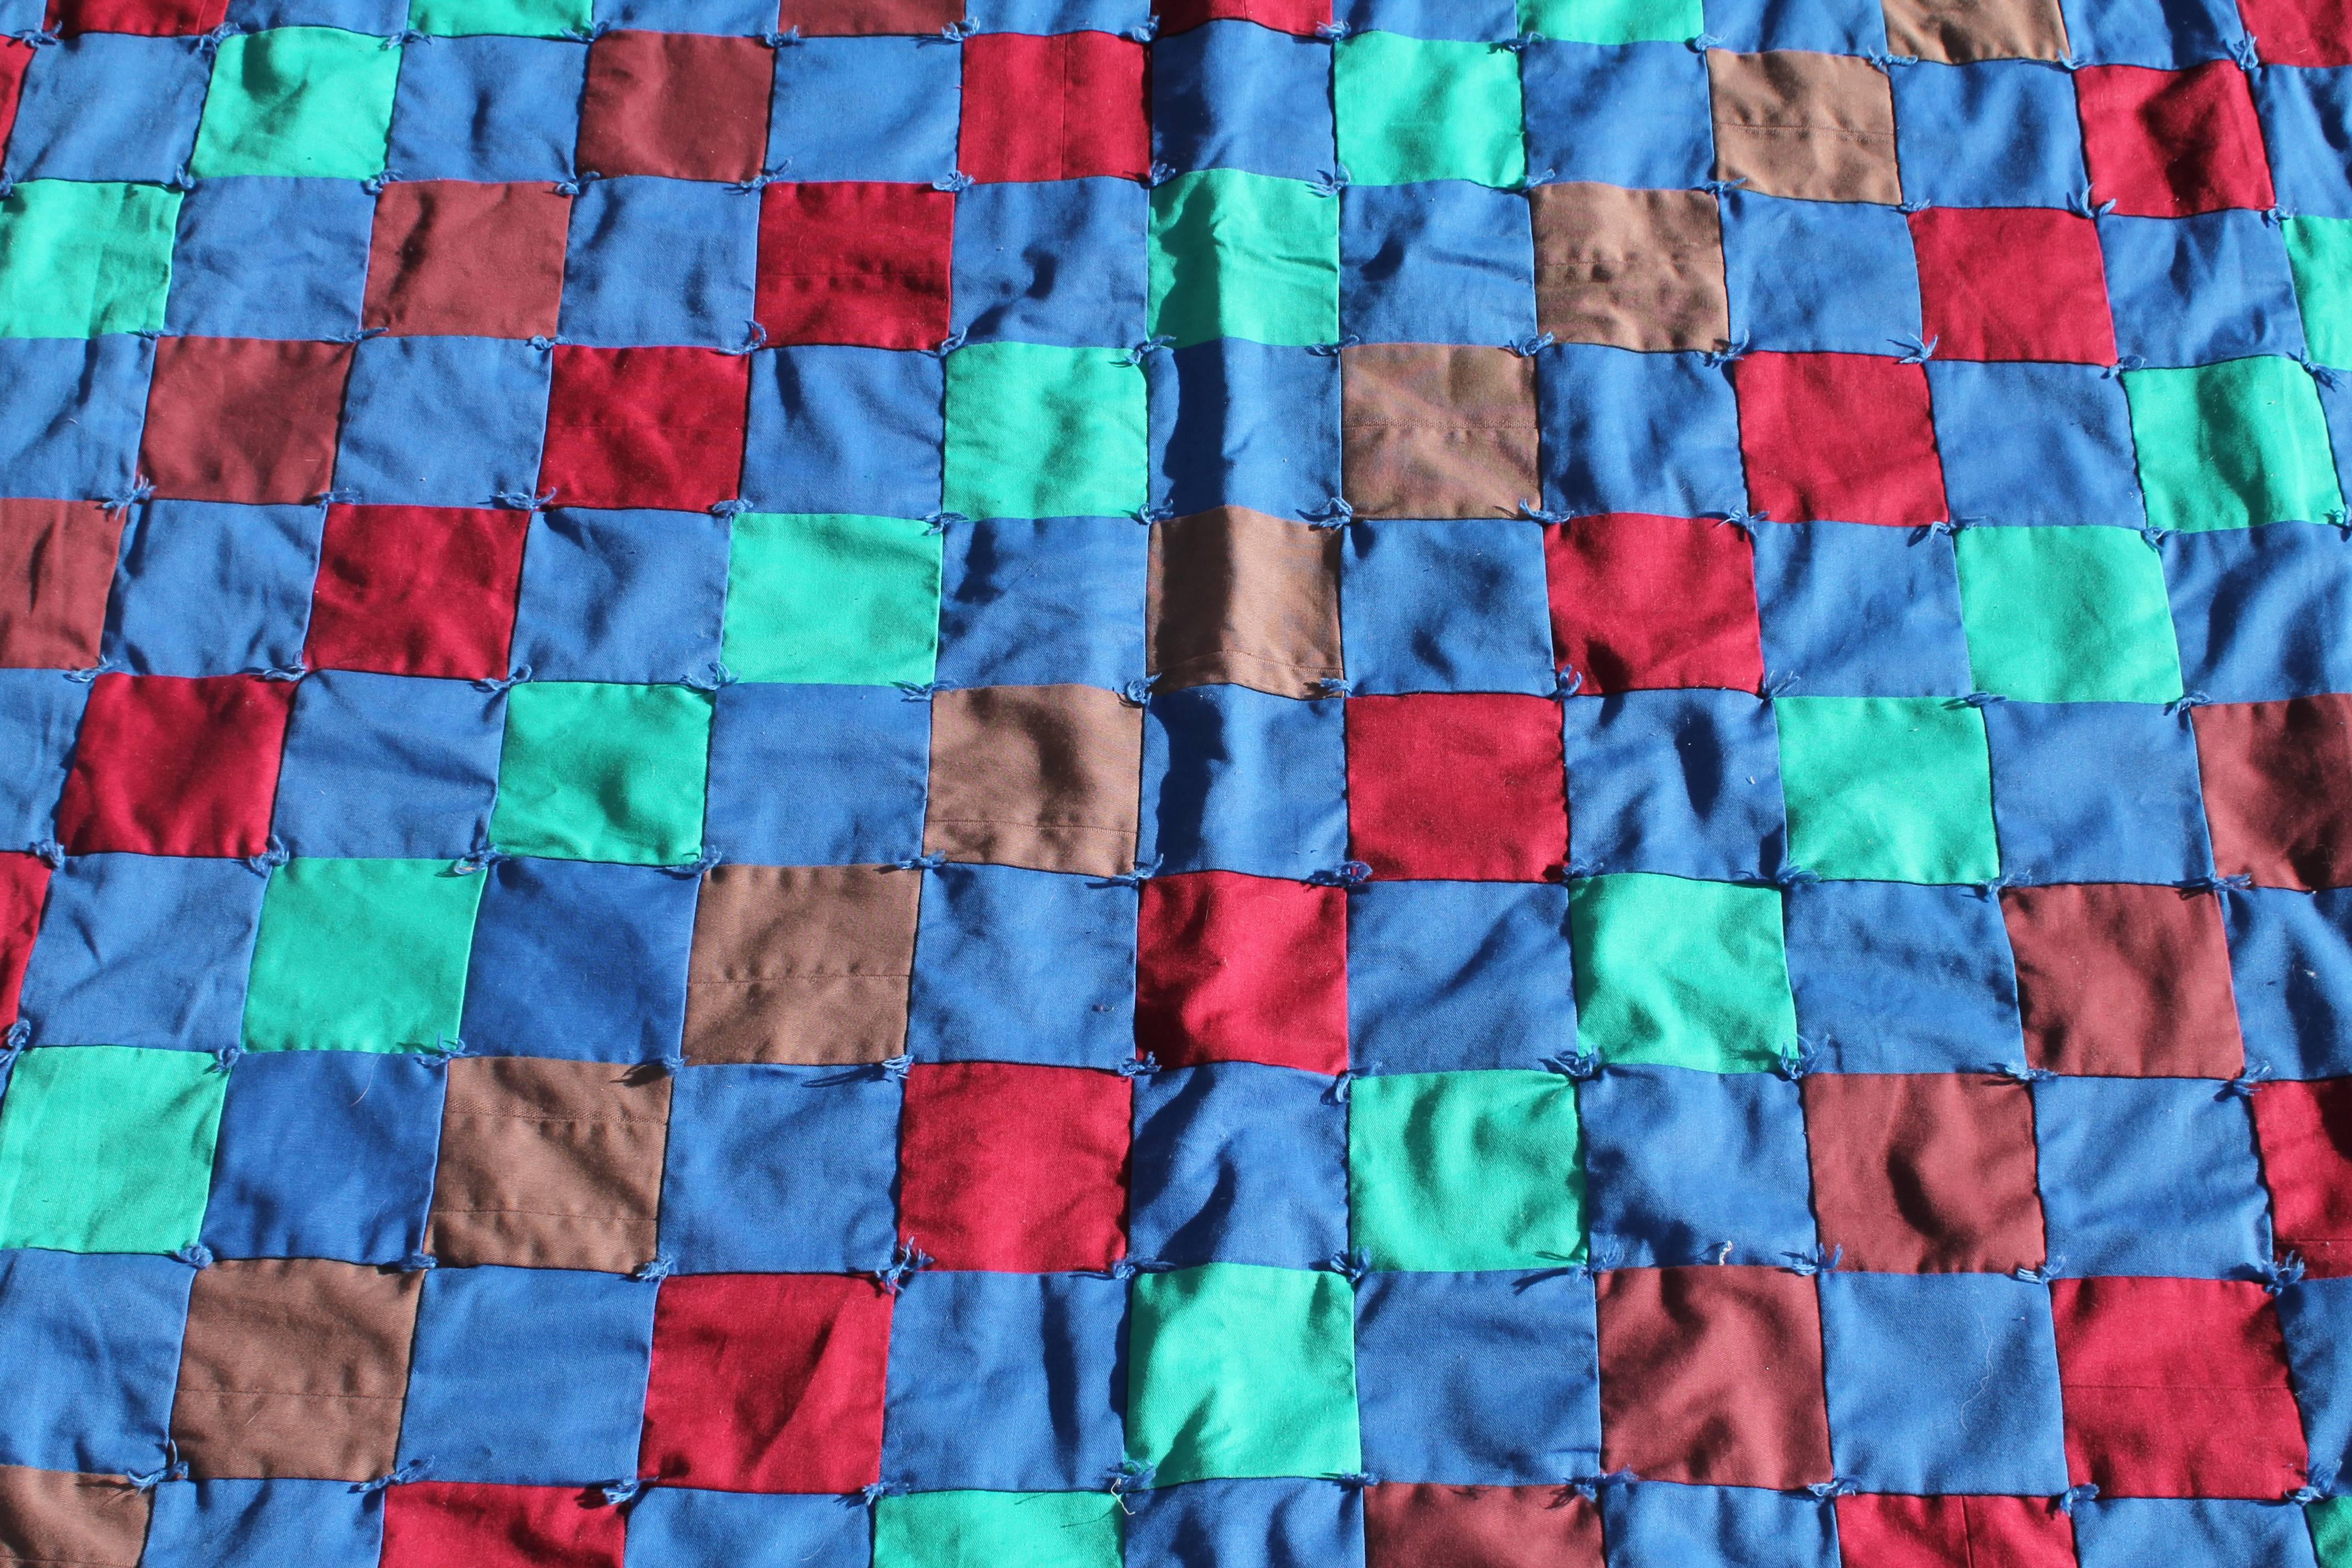 This amazing and colorful one patch quilt is tied and in mint condition. It is very large in size and has the same mint green back as in the front of the quilt.